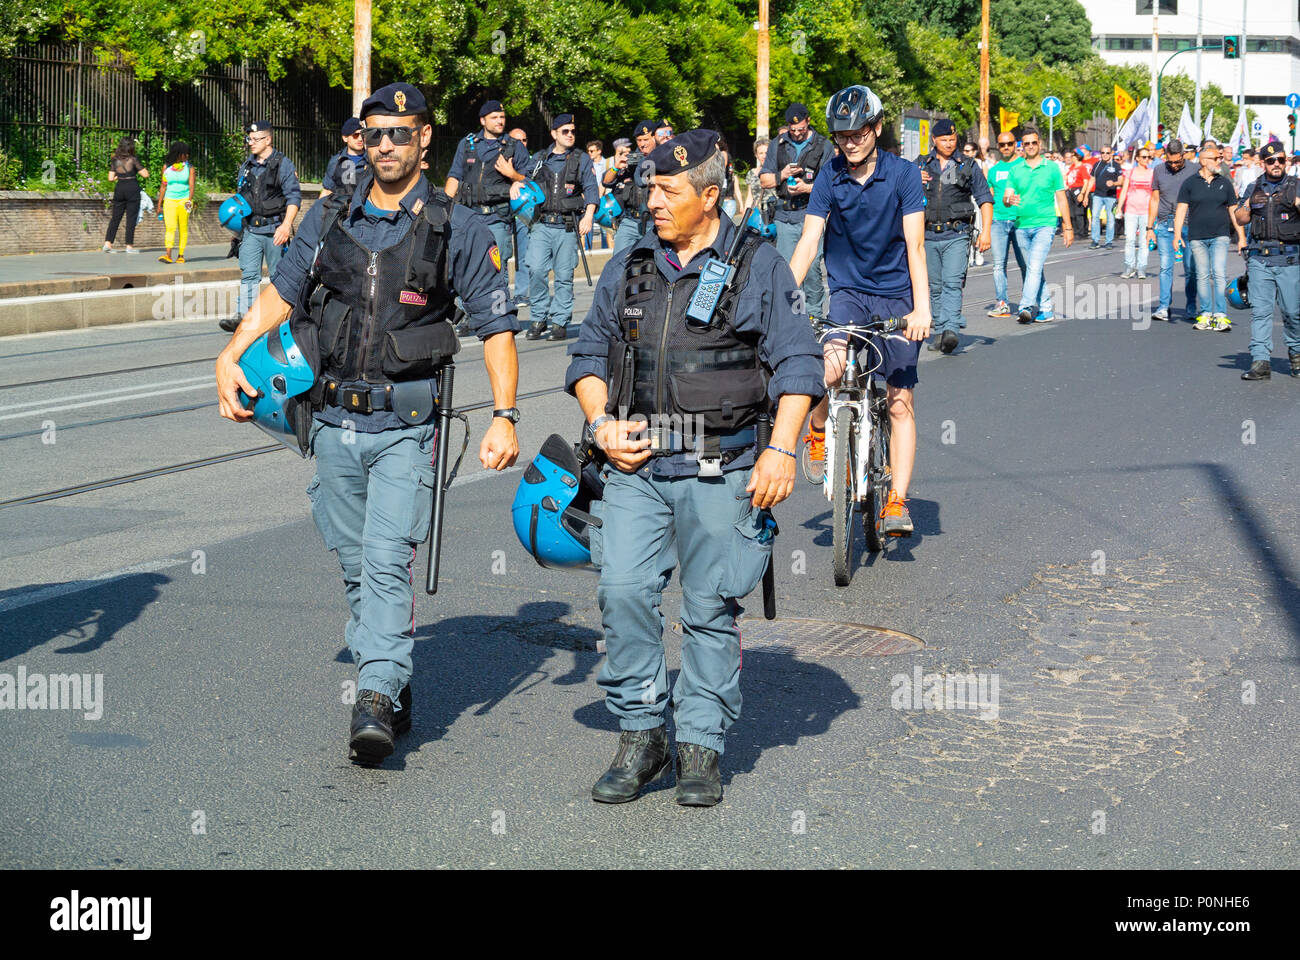 Italian police officers at gay pride, 2018, Rome, Italy Stock Photo